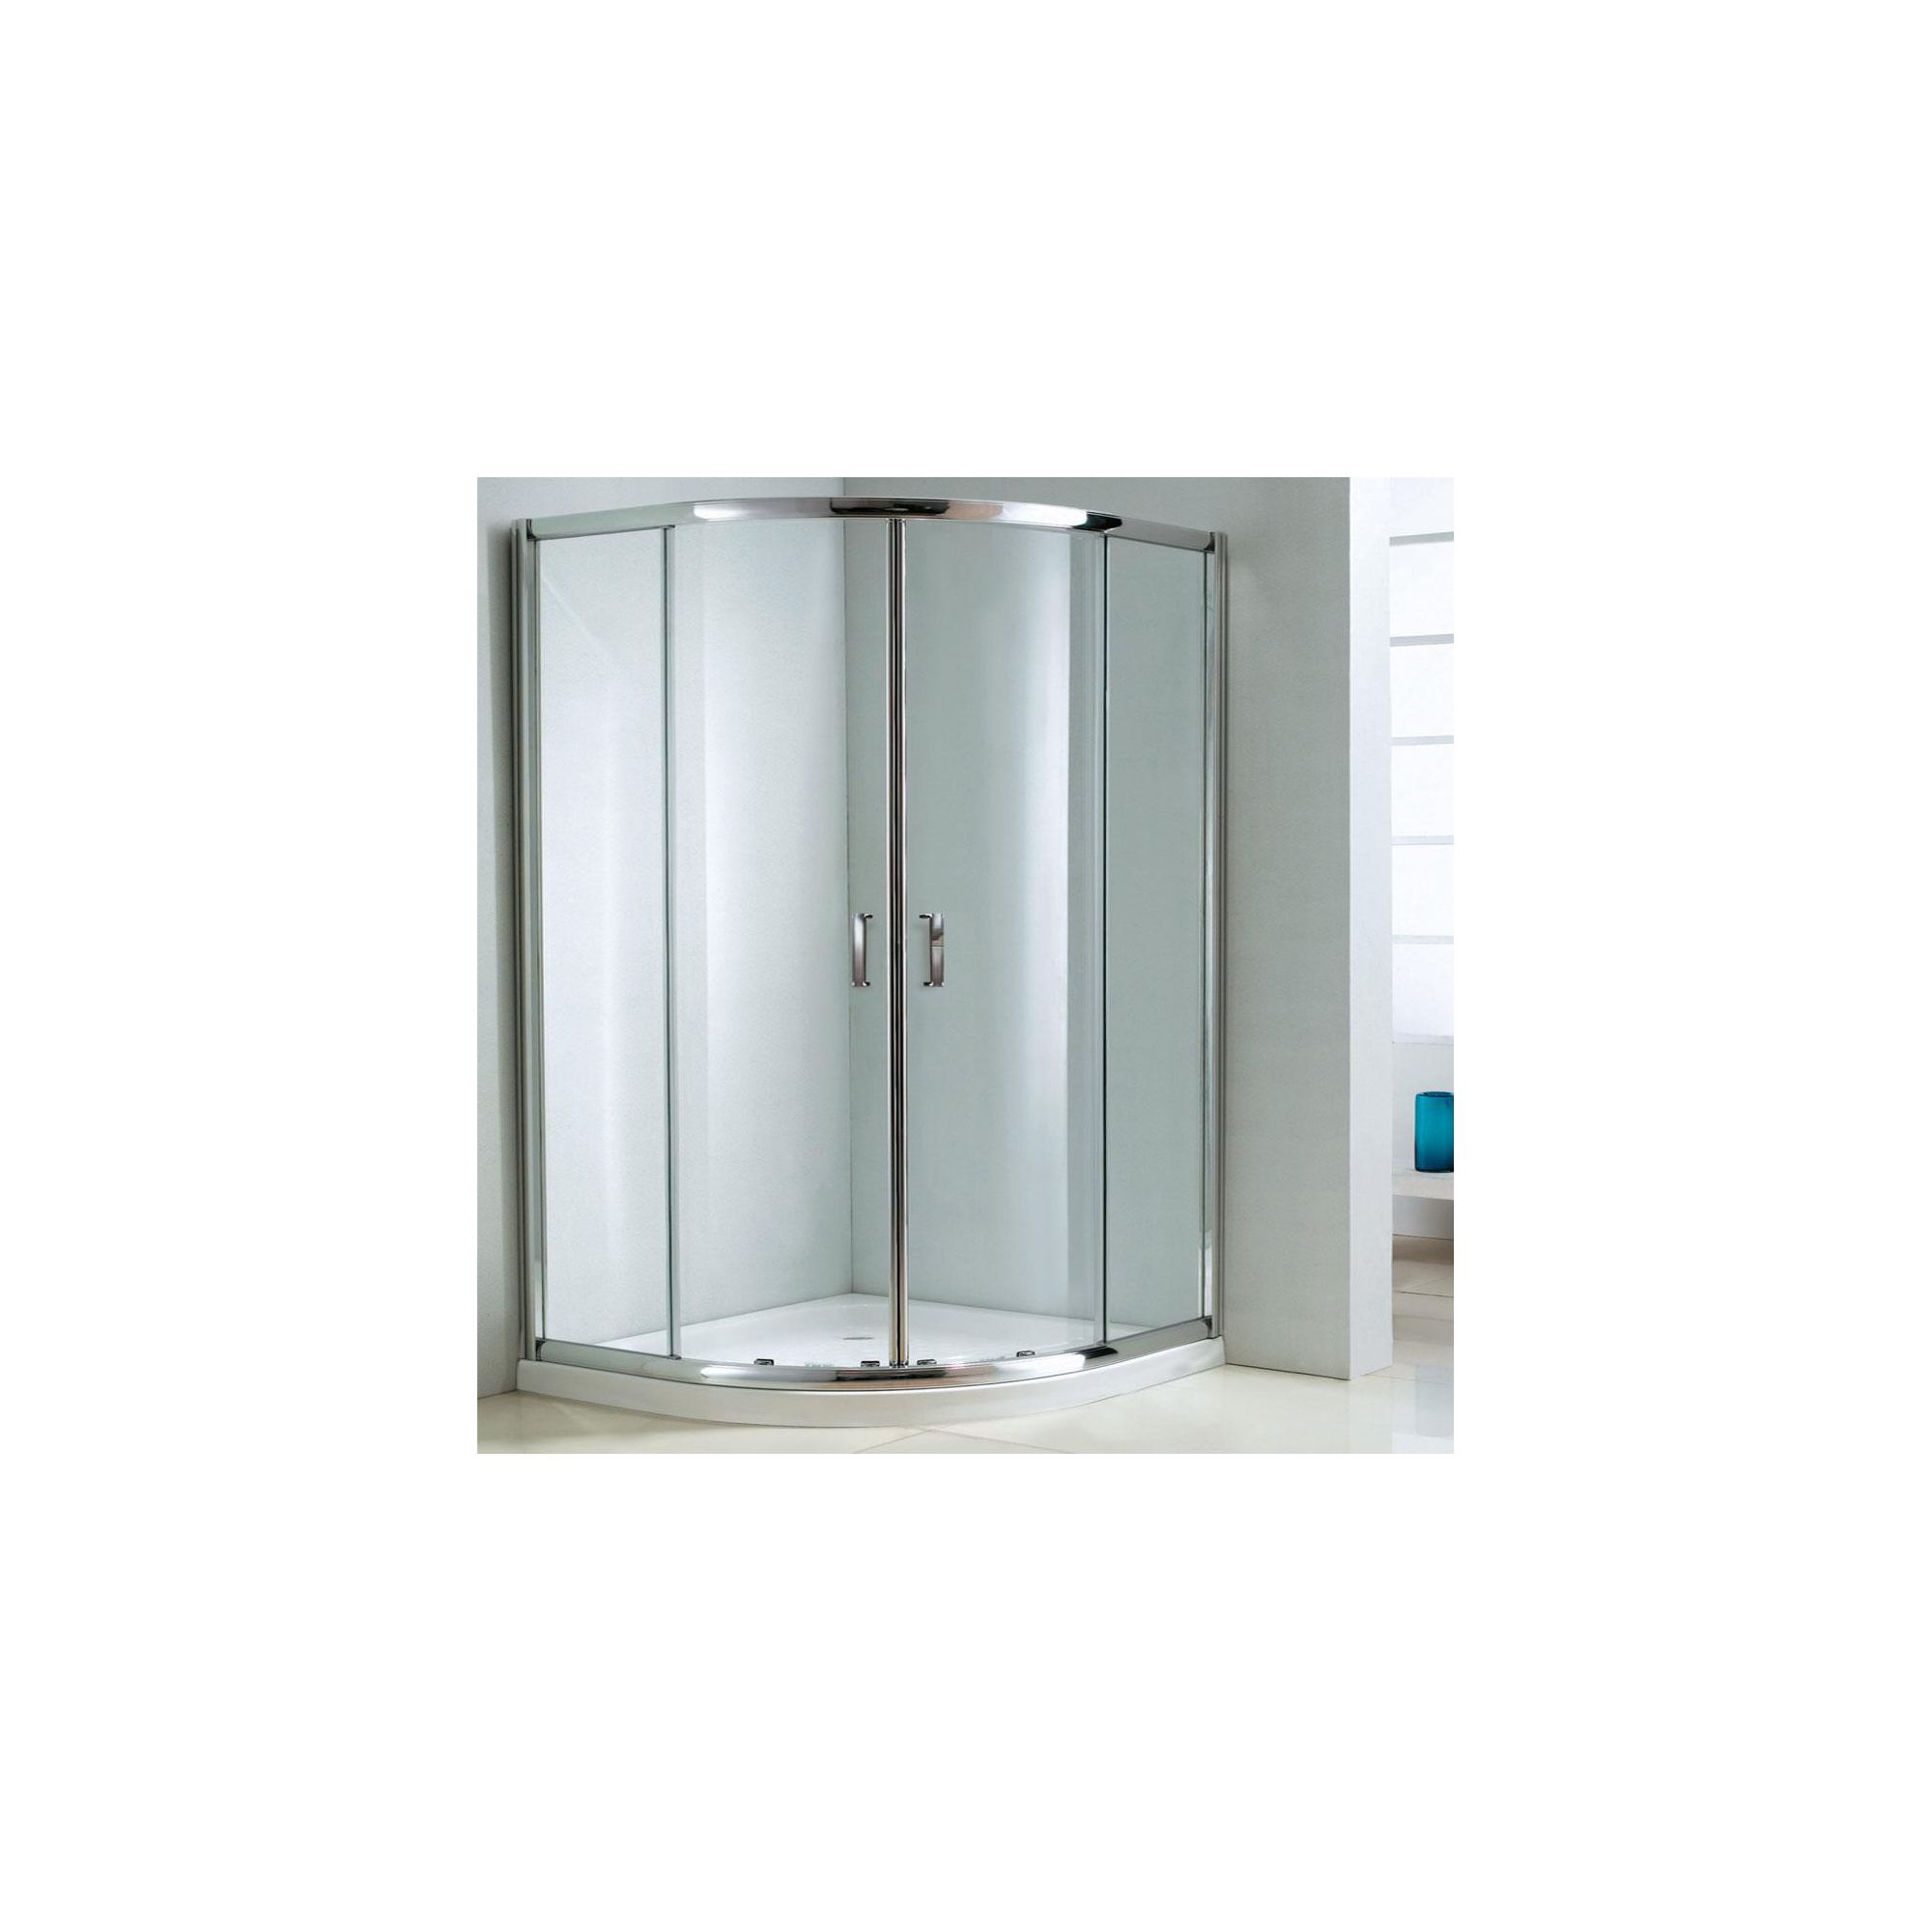 Duchy Style Double Offset Quadrant Door Shower Enclosure, 1200mm x 800mm, 6mm Glass, Low Profile Tray, Right Handed at Tesco Direct